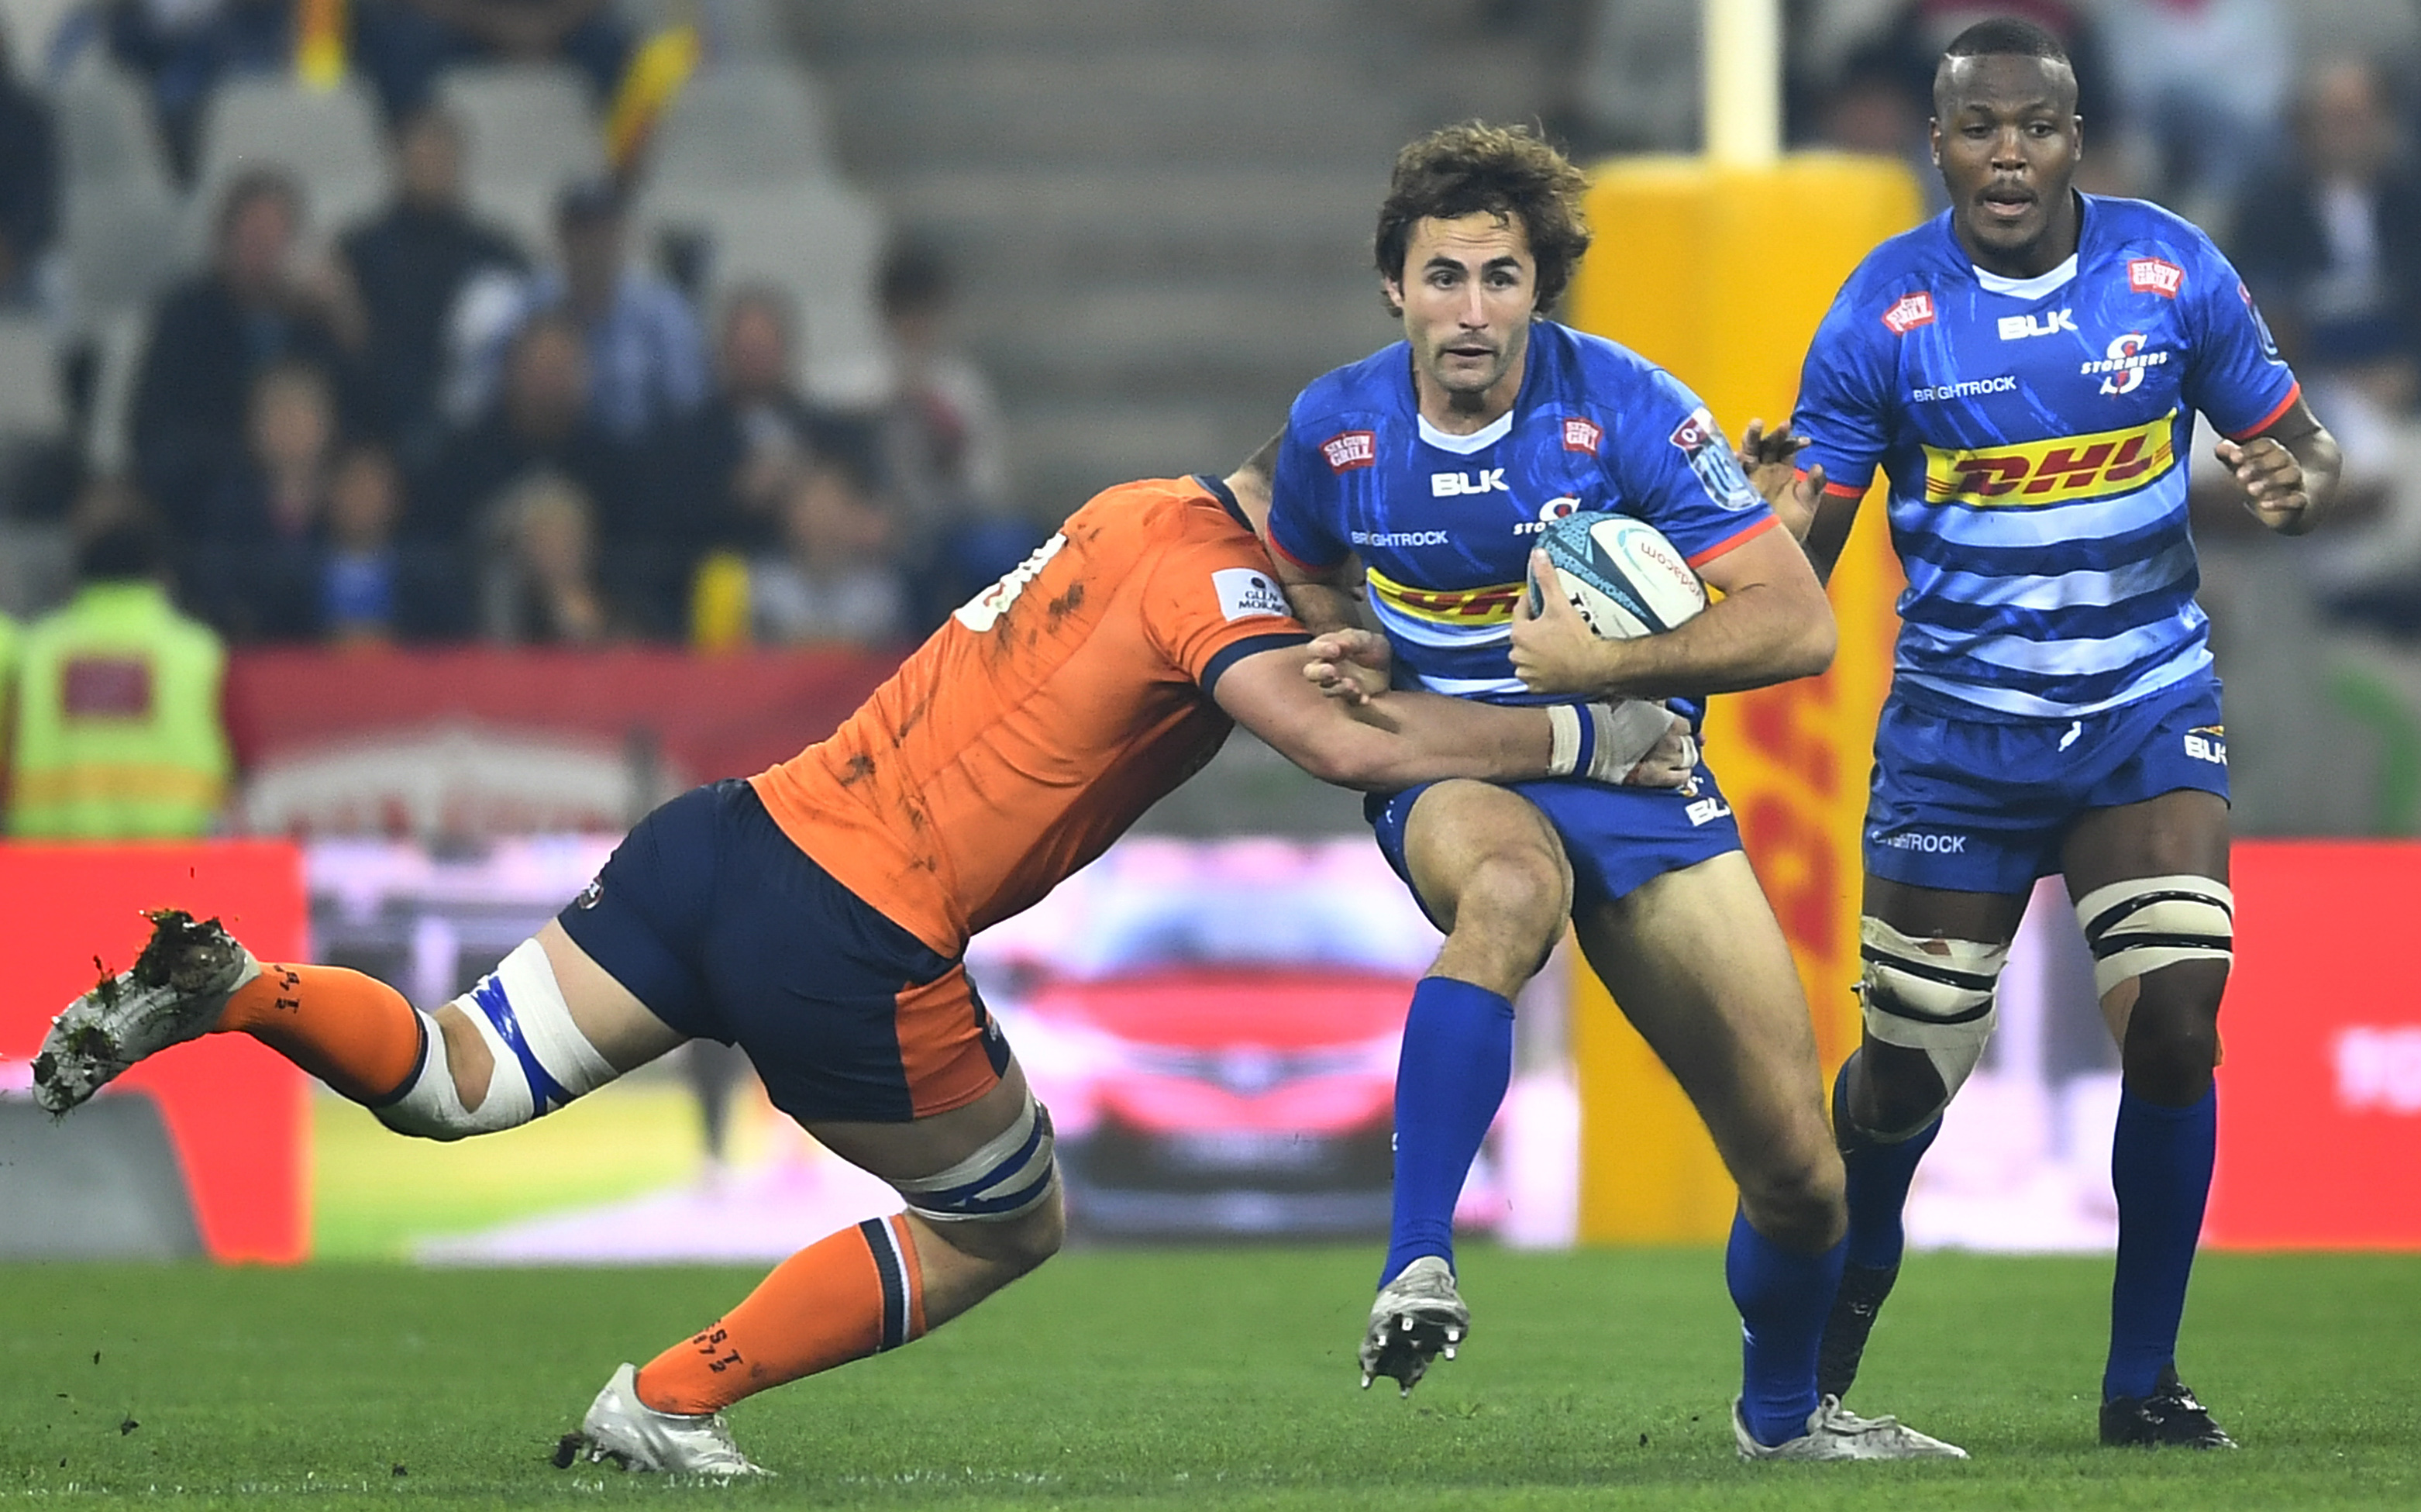 History and URC glory beckons for Stormers ahead of Ulster showdown